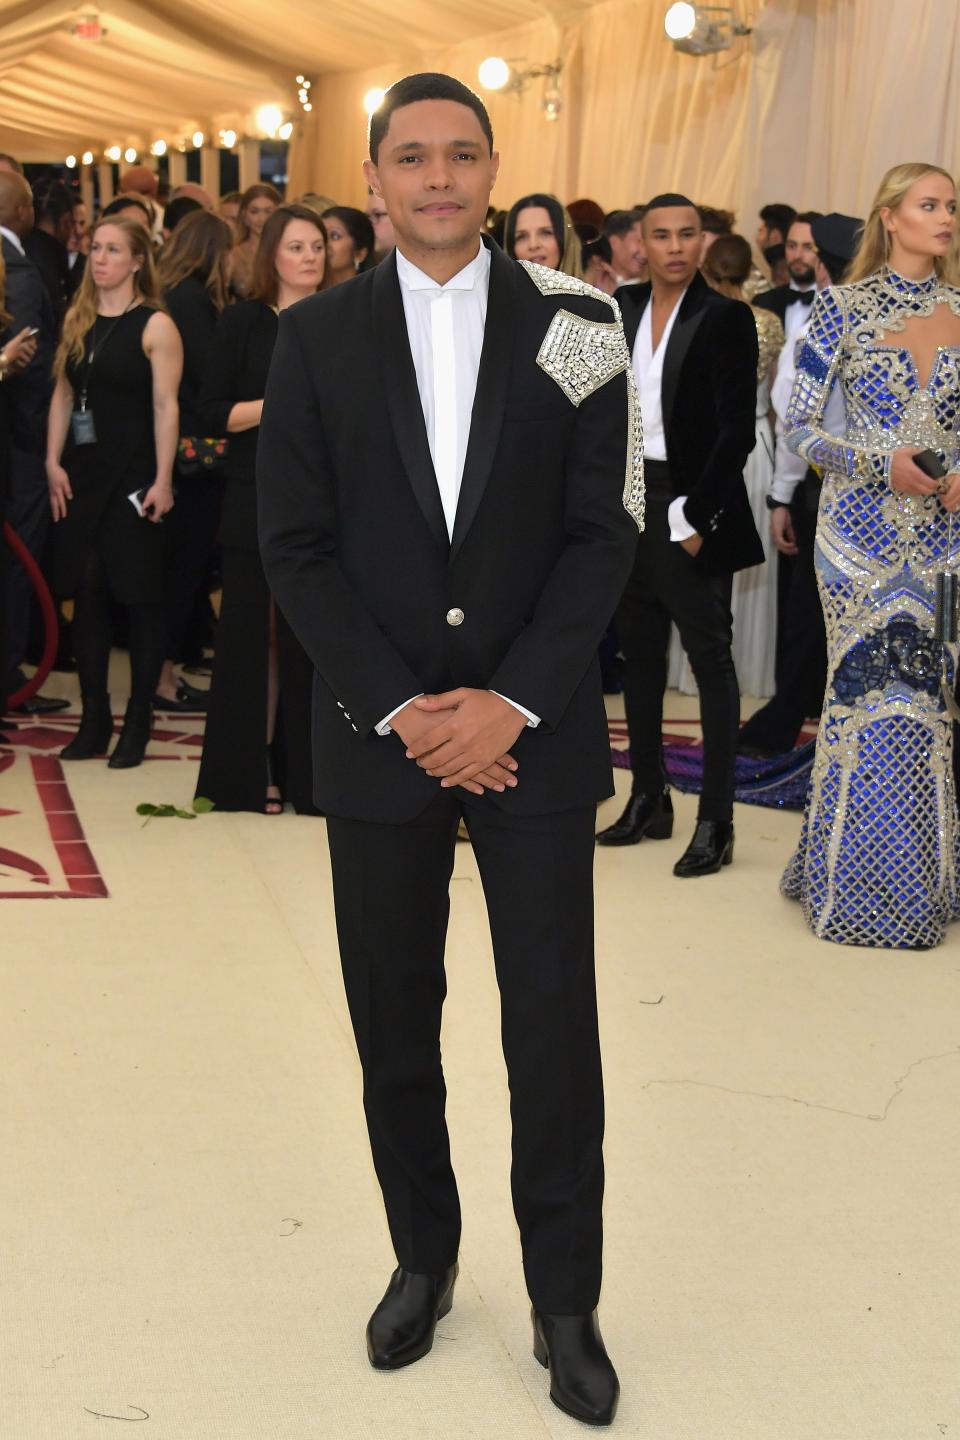 trevor noah wears a suit with a large, sparkling cross on its shoulder at the Met Gala 2018.